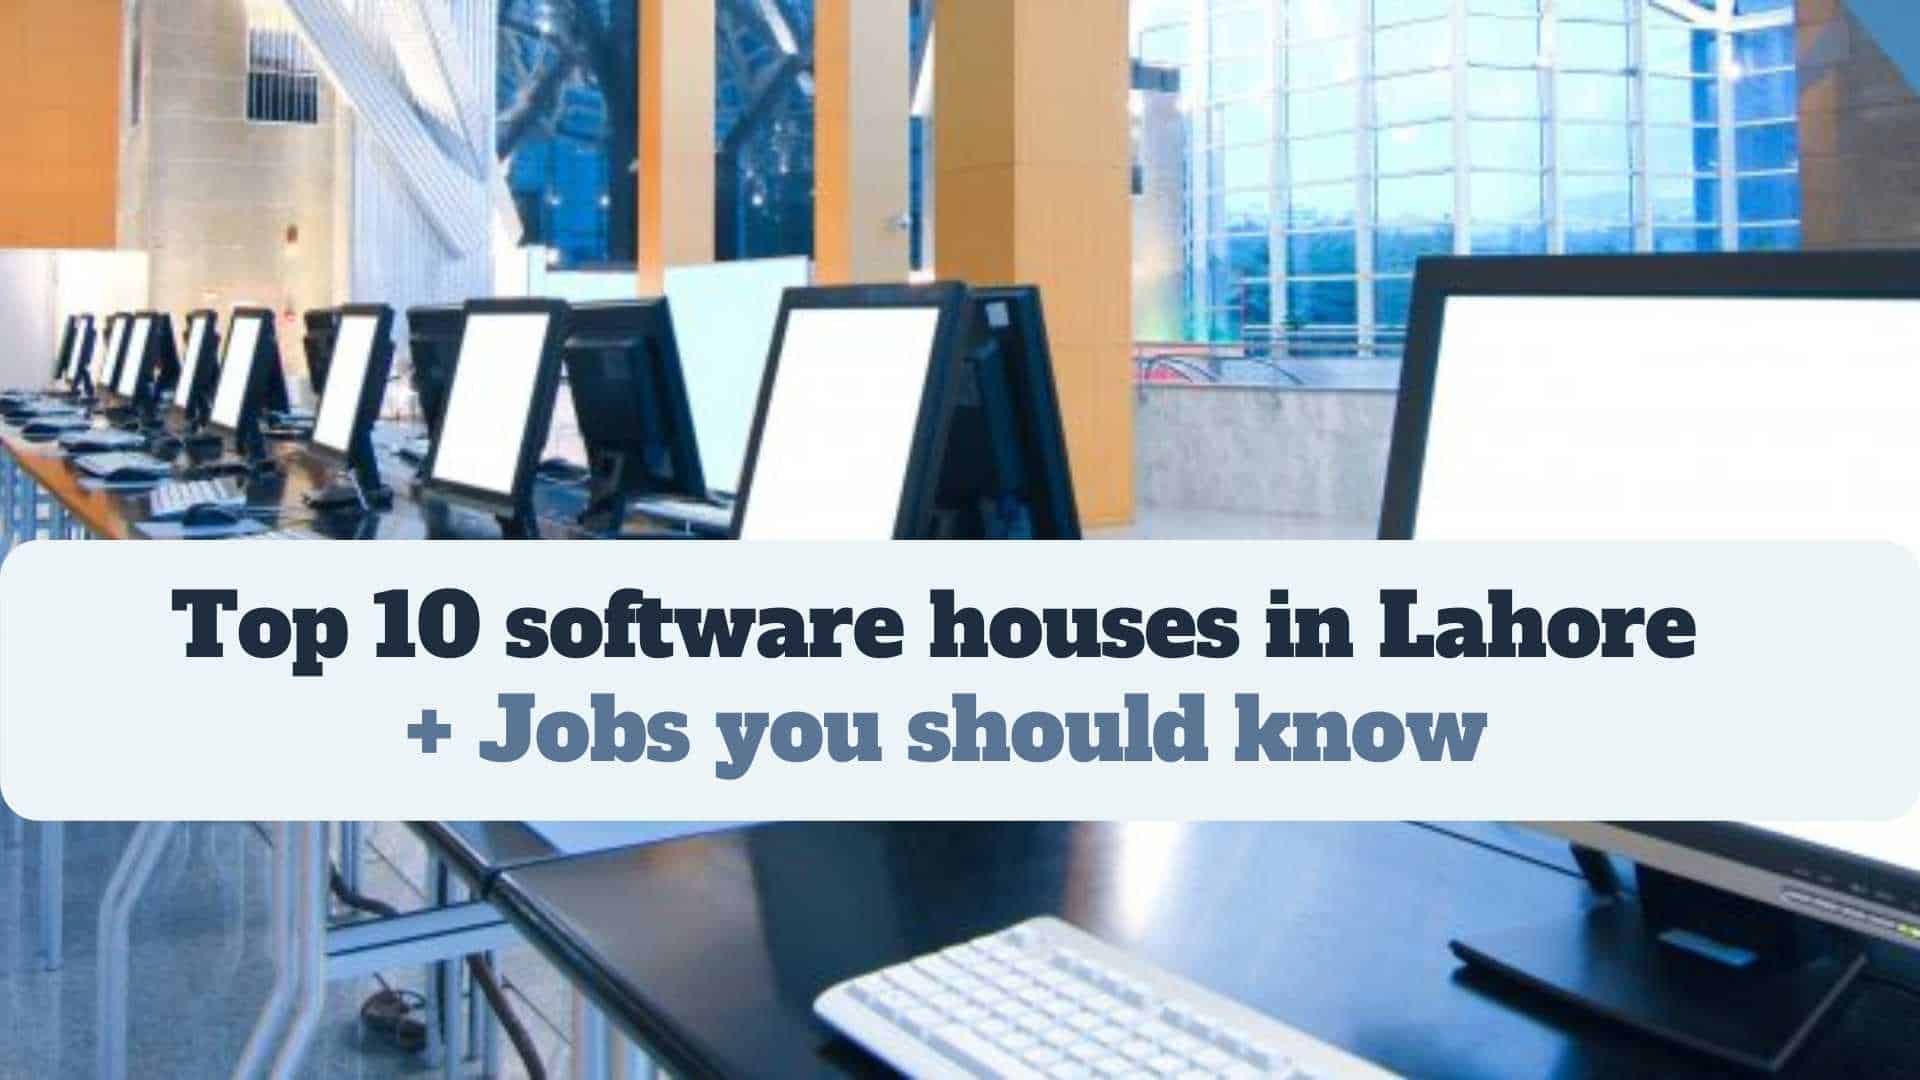 Top 10 software houses in Lahore + Jobs you should know